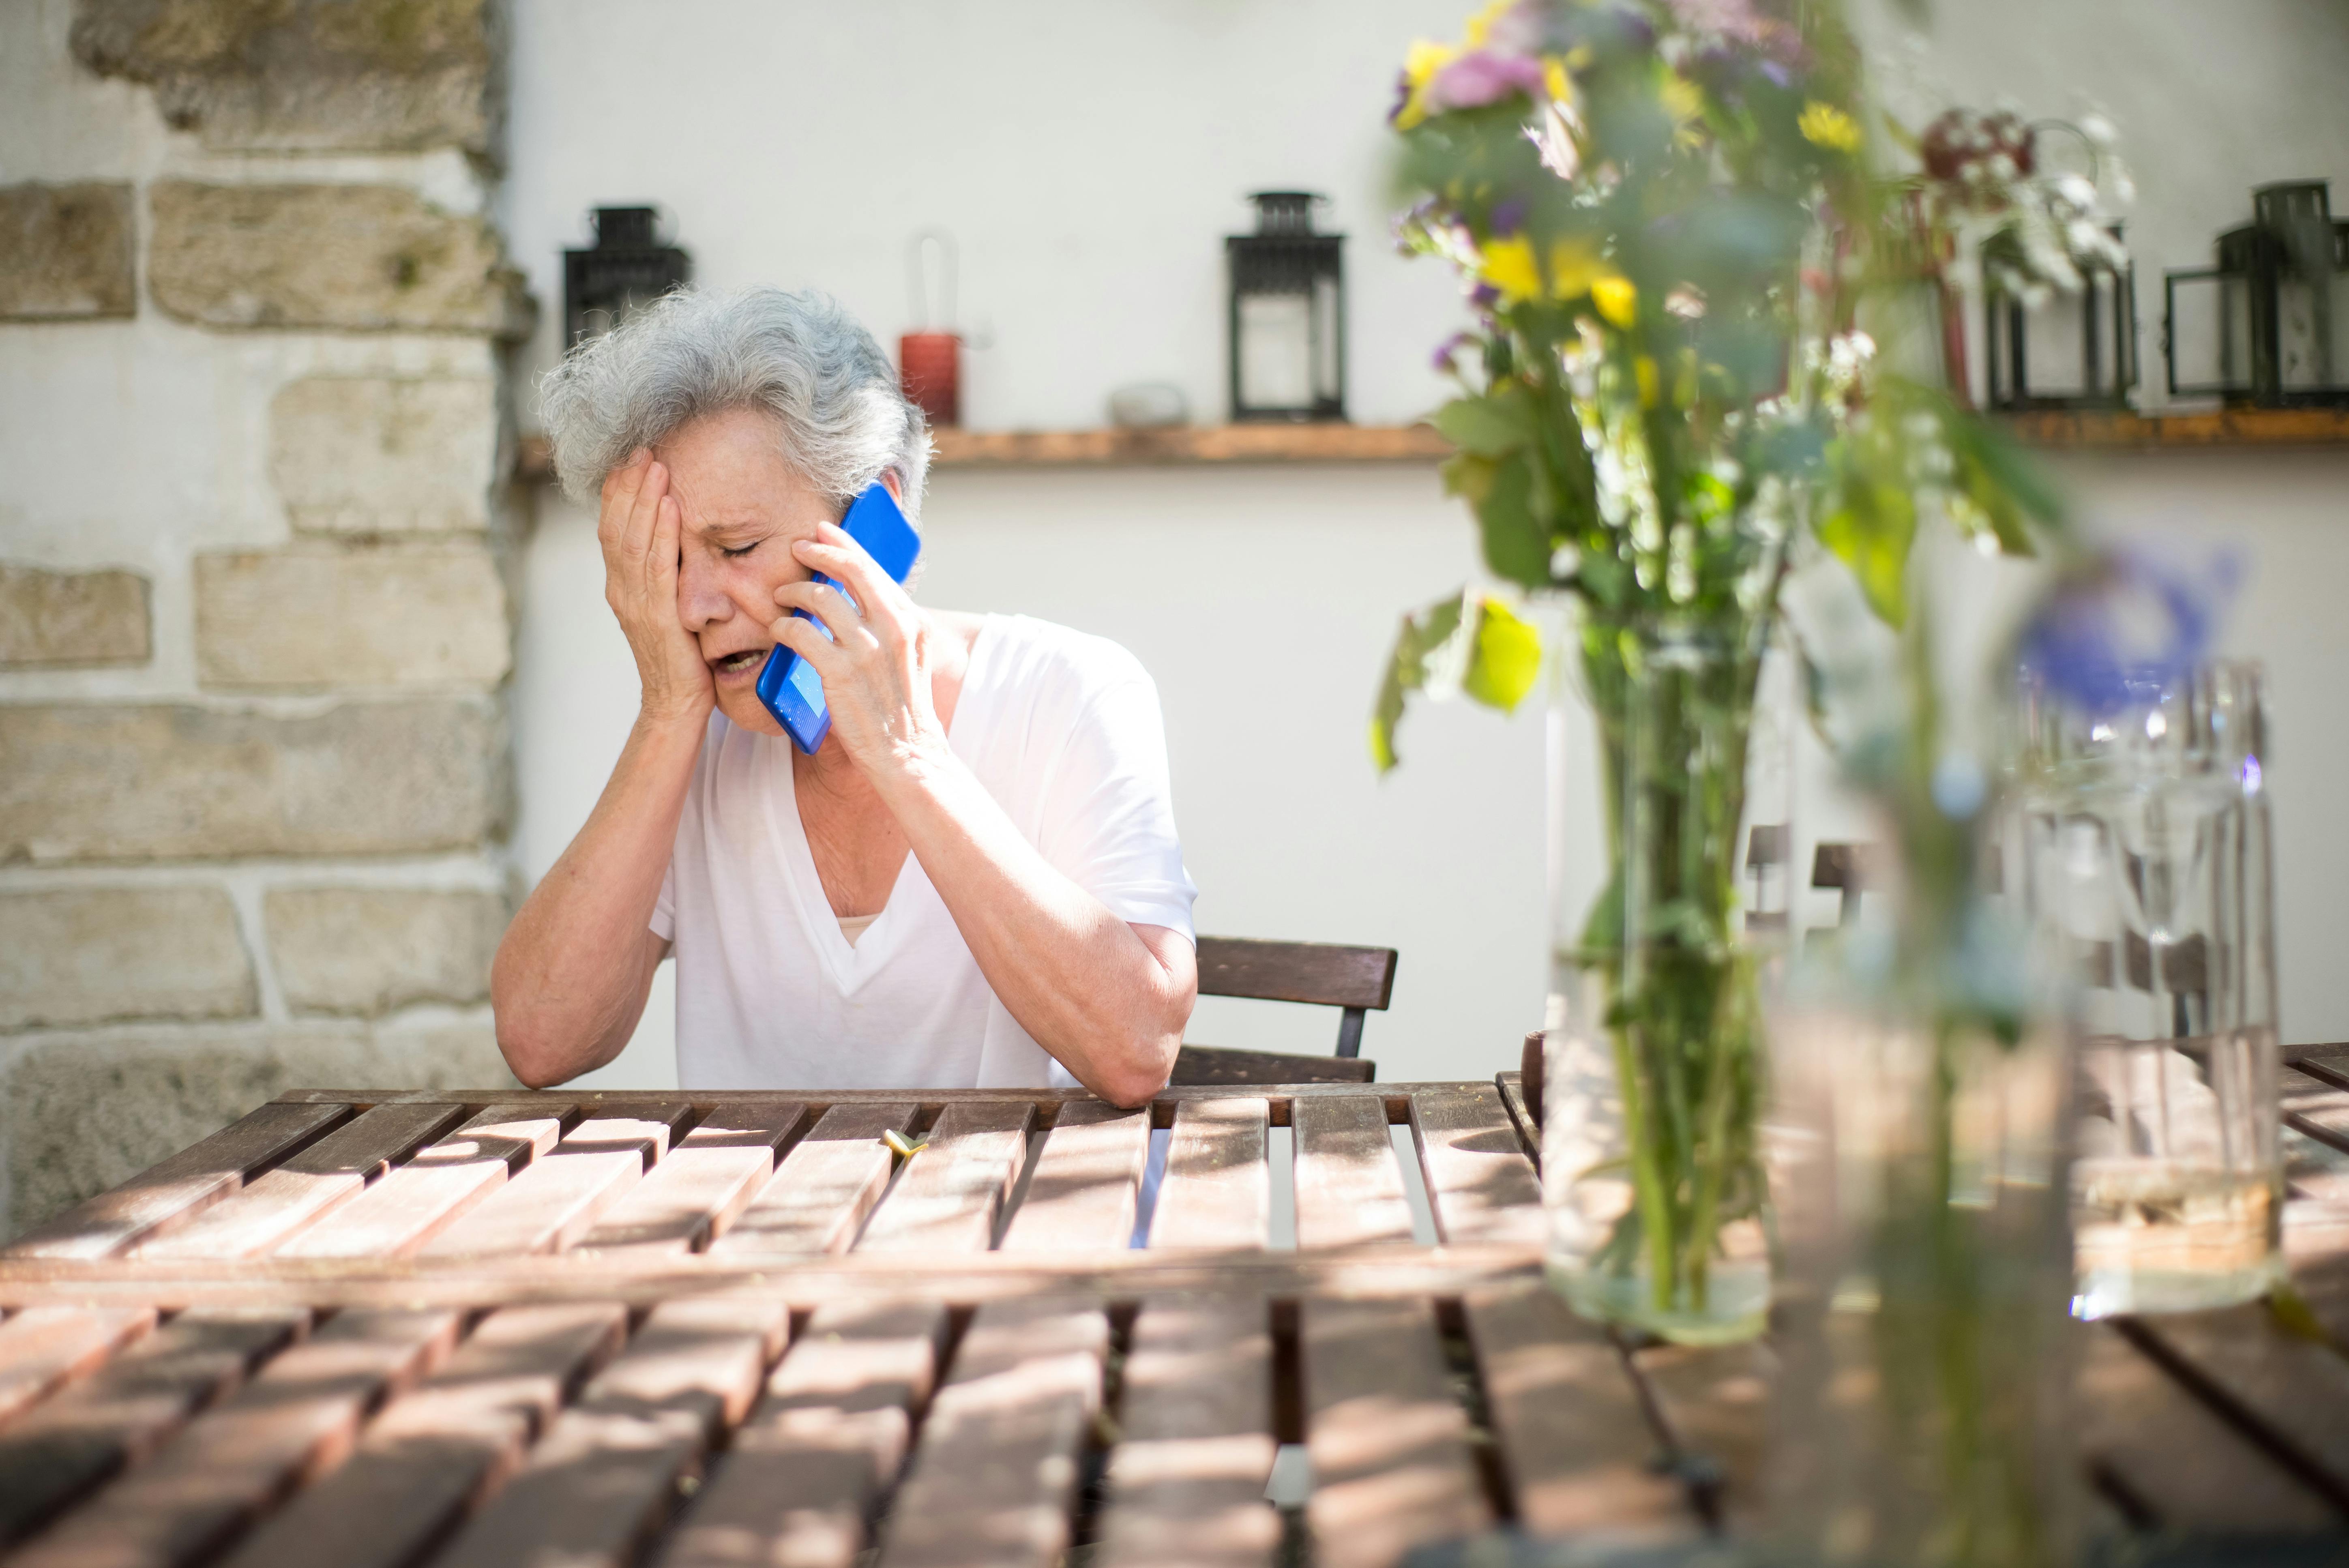 An upset older woman on the phone | Source: Pexels